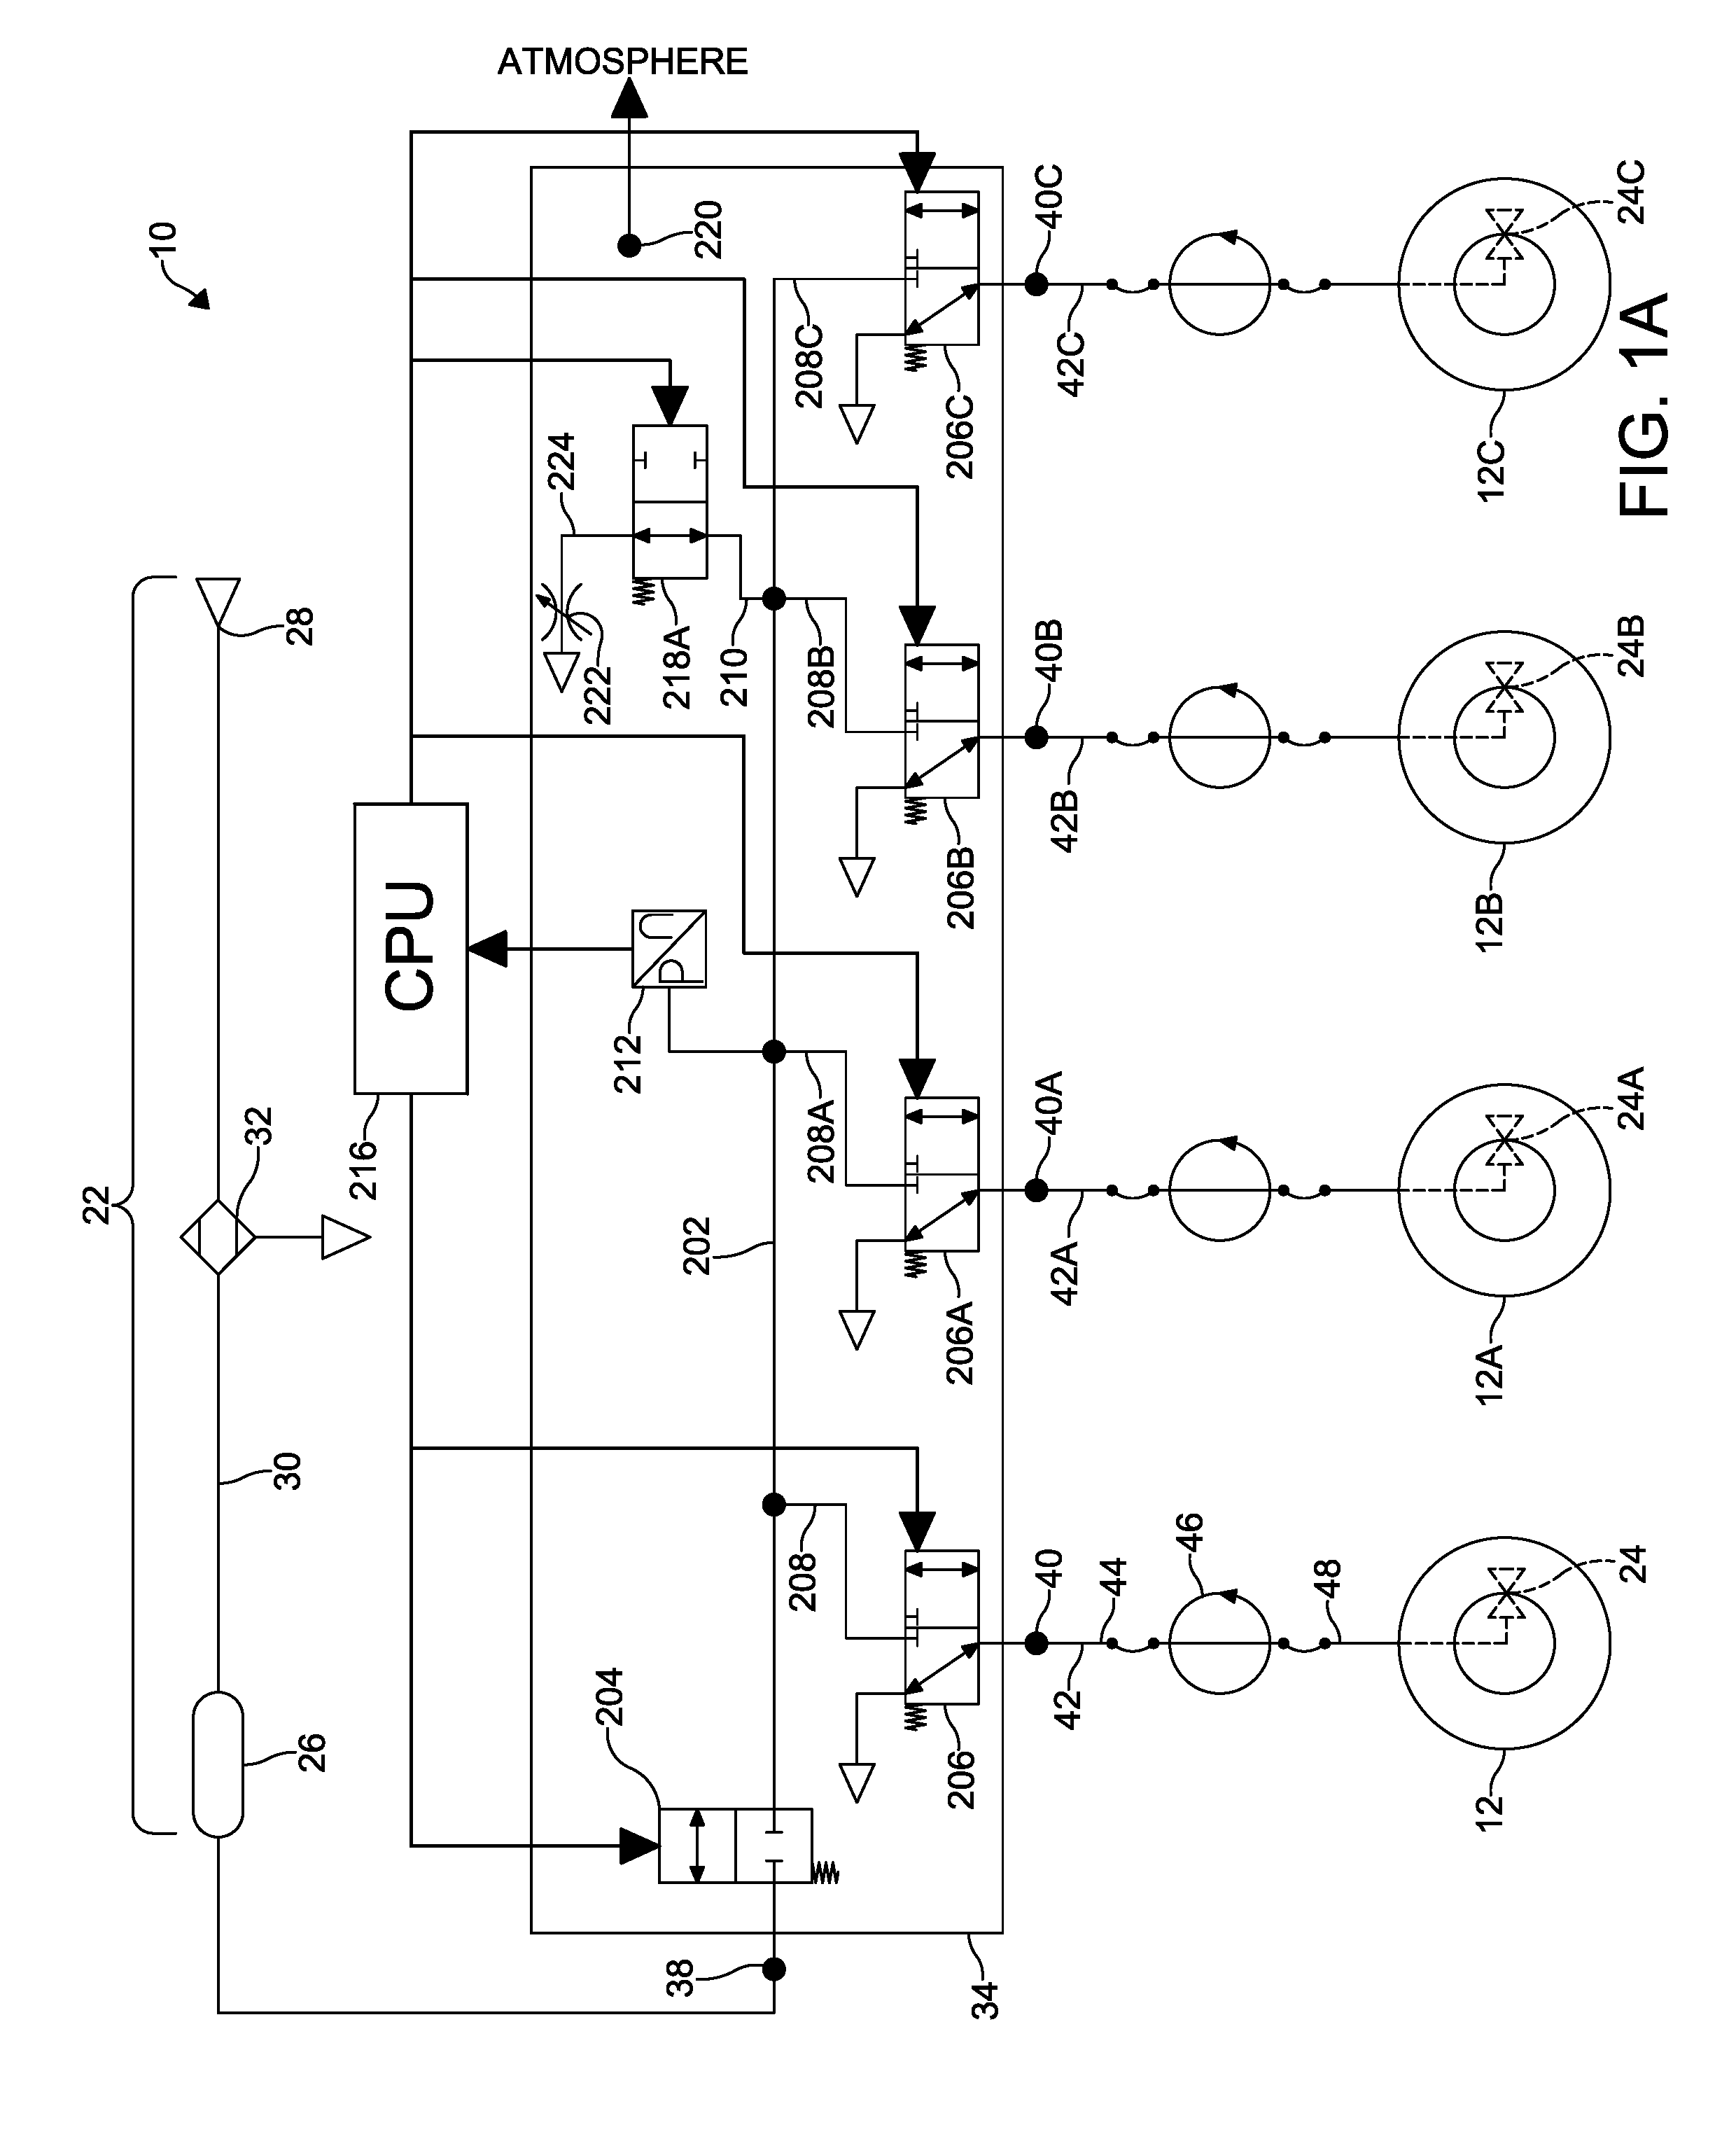 System and method for decreasing tire pressure